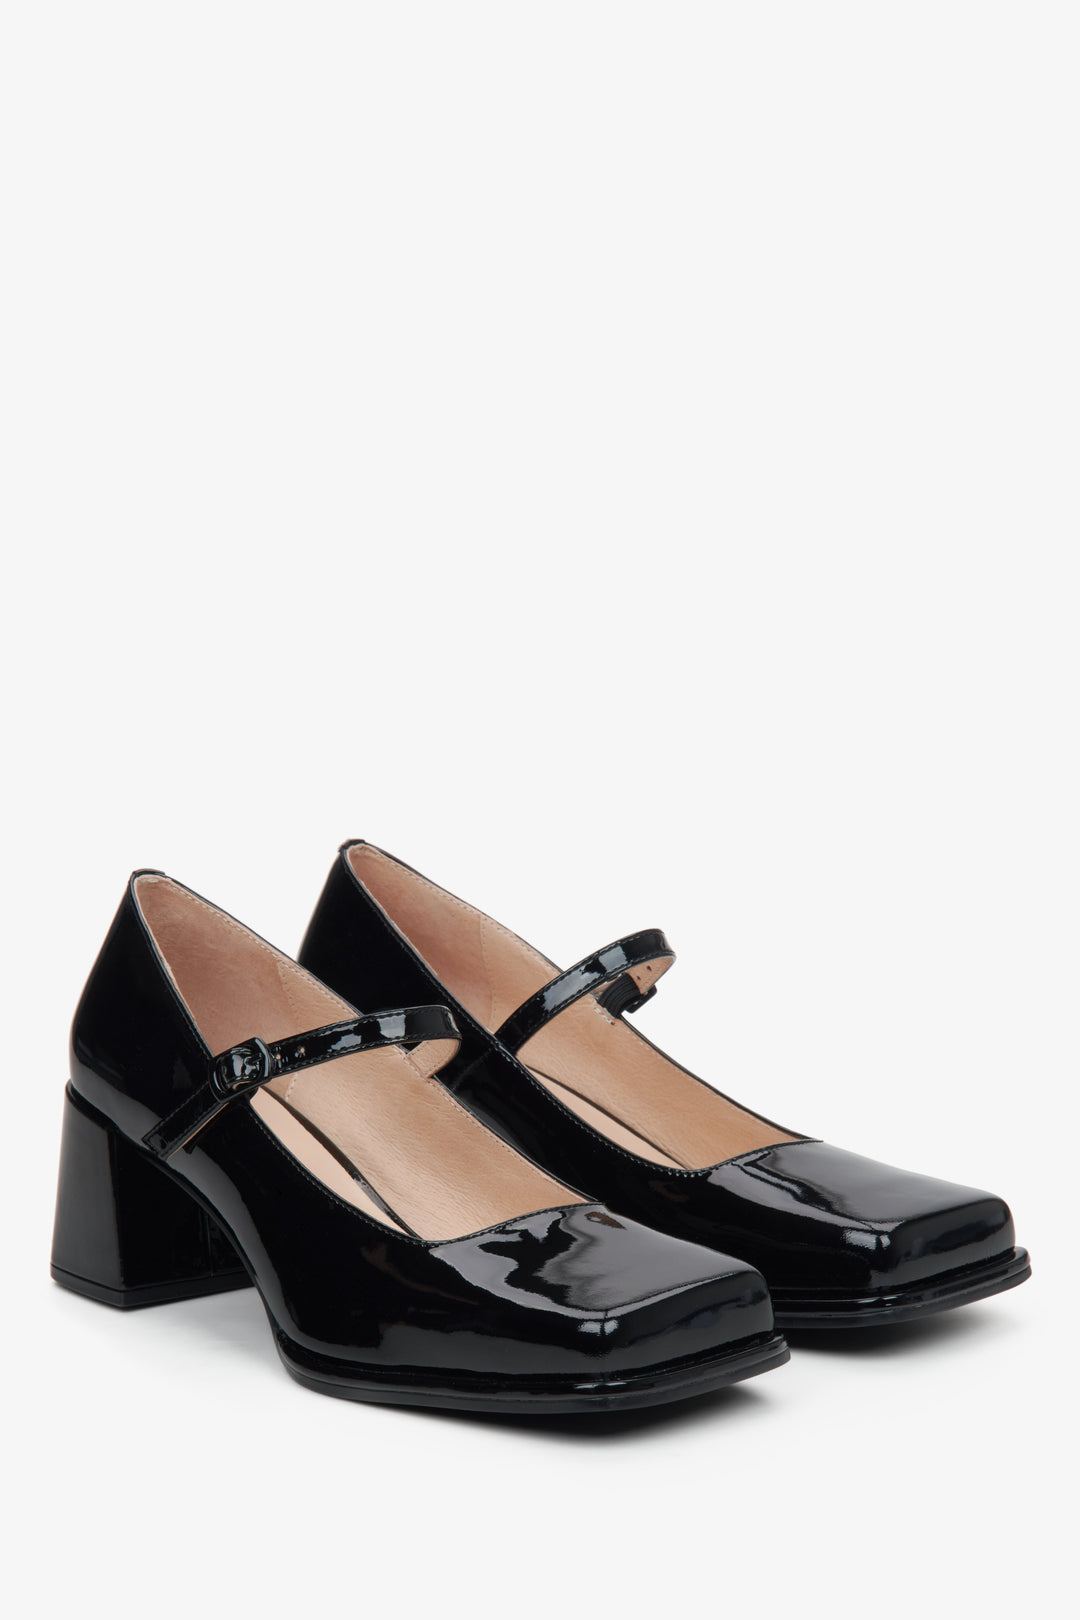 Women's Black Mary Jane Pumps made of Genuine Patent Leather Estro ER00114679